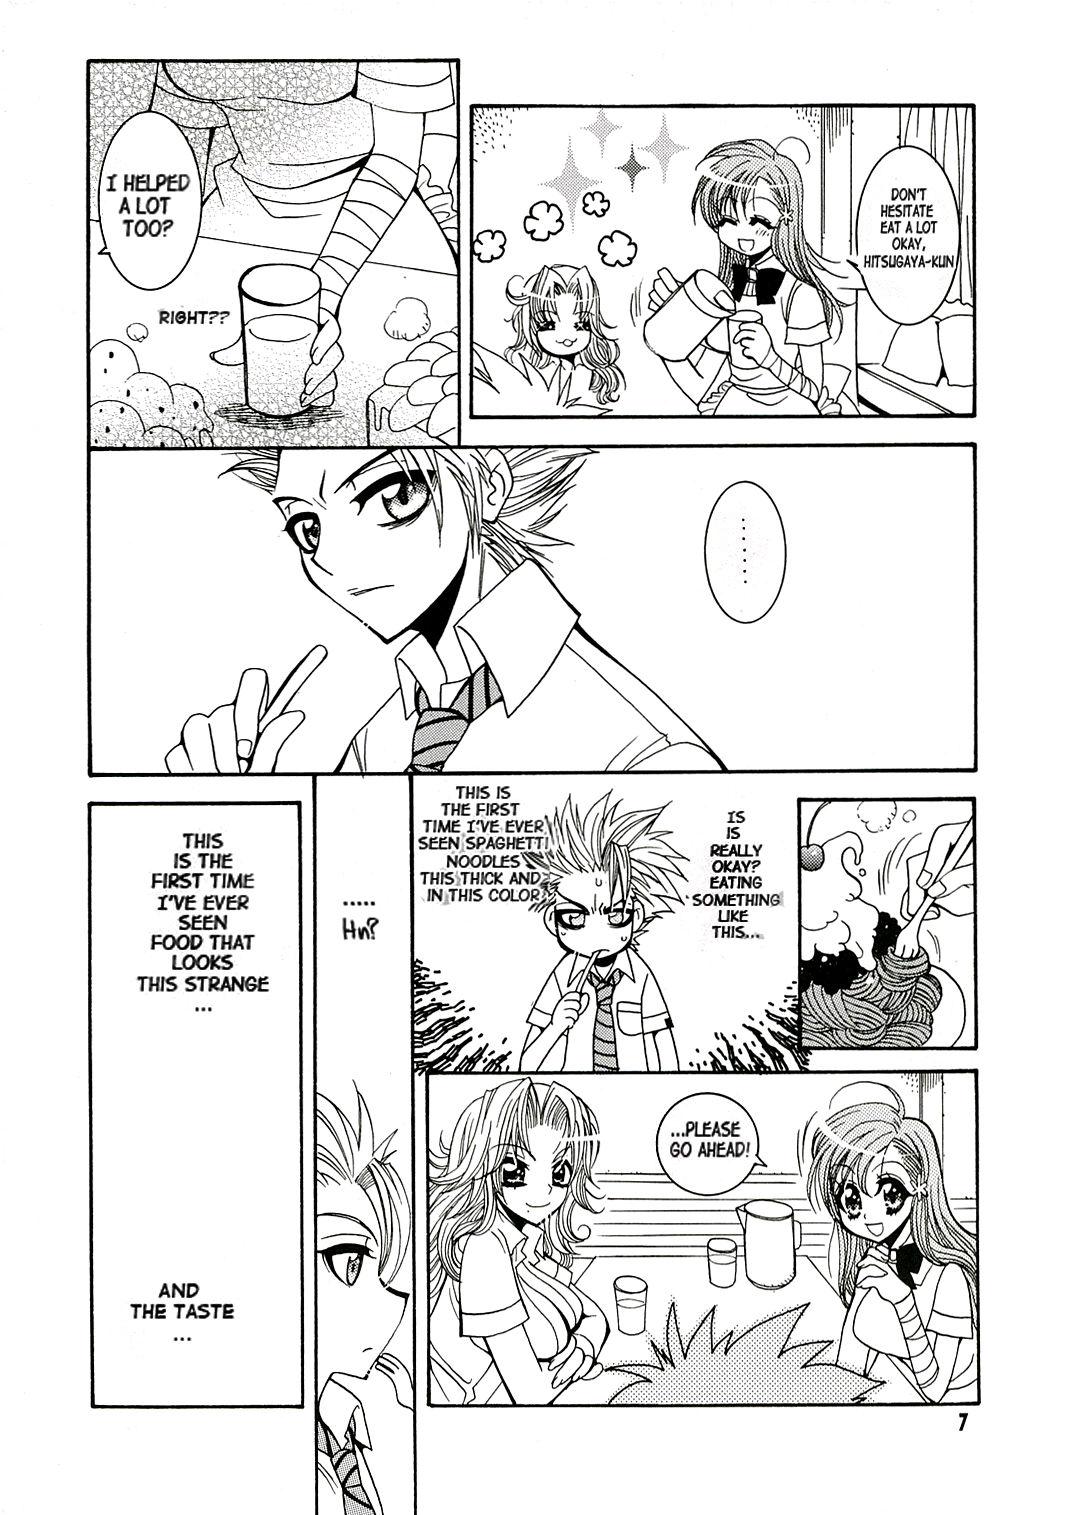 Amazing BABY BLUE! - Bleach Three Some - Page 6